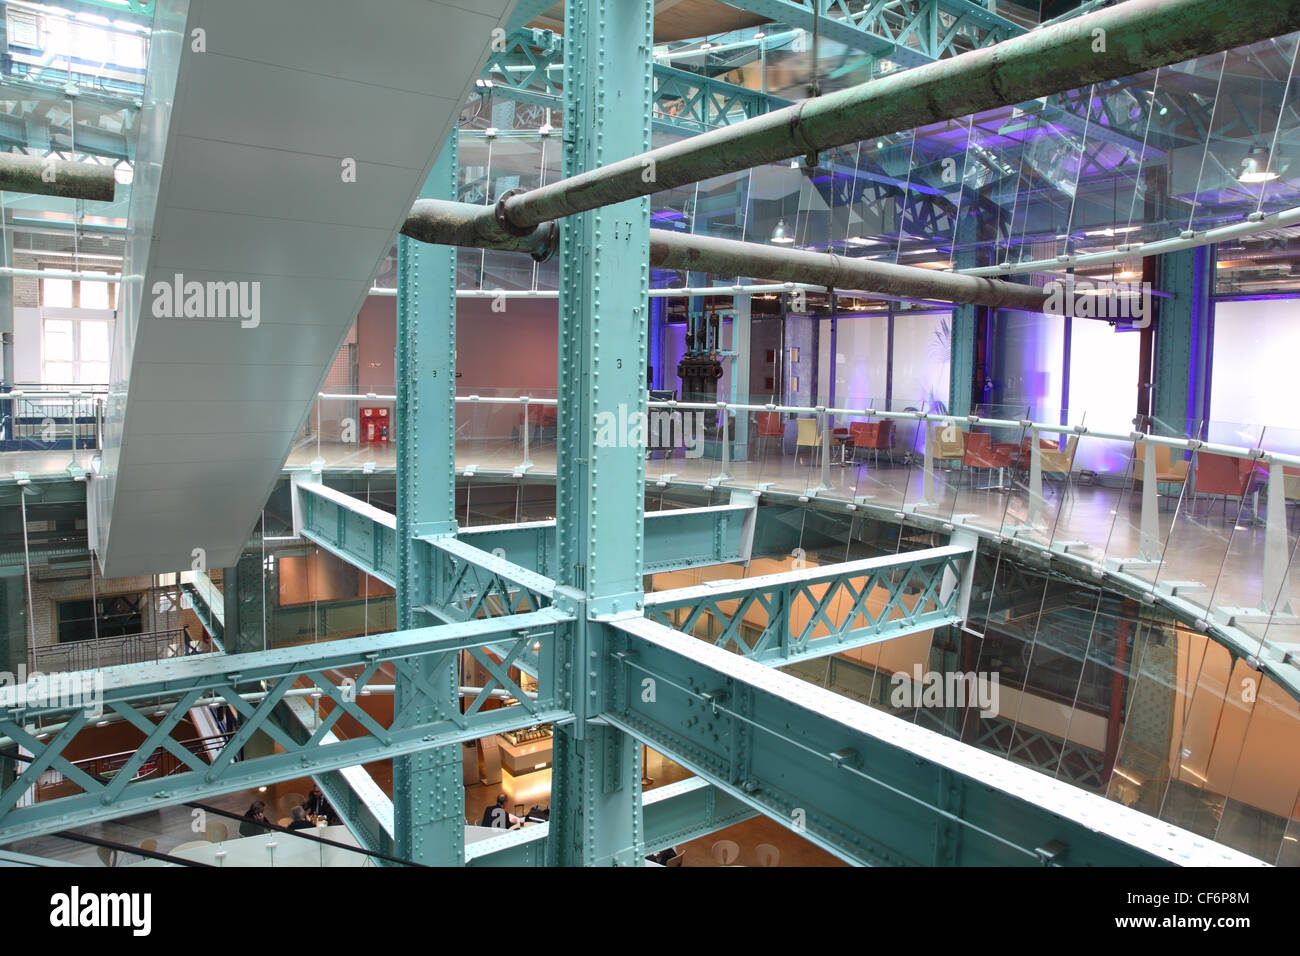 green, metal ceilings in the building. floors. glass walls Stock Photo